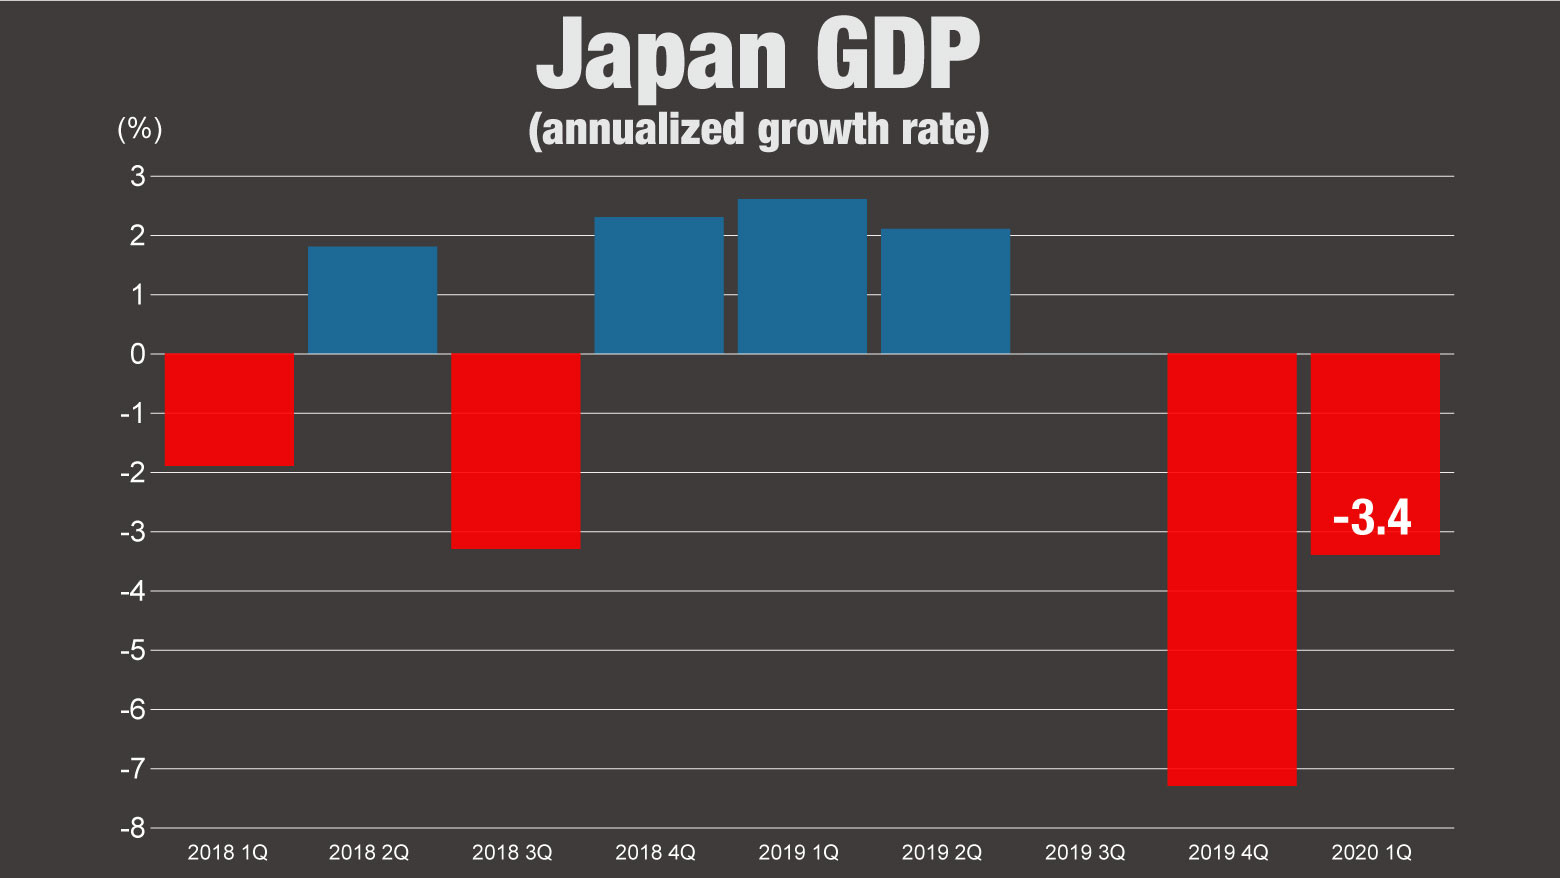 Worst yet to come for Japanese economy